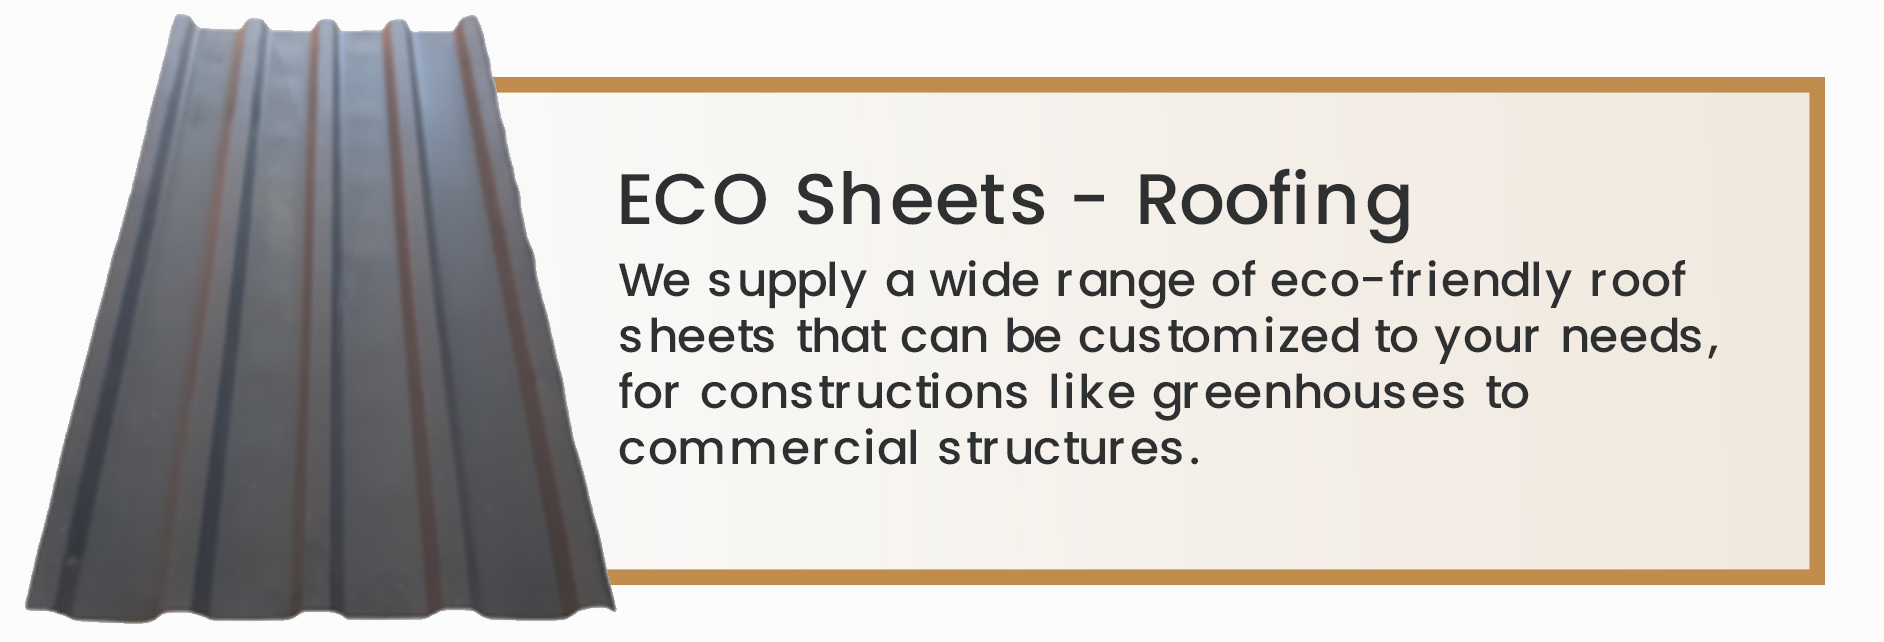 ECo product slide ROOF SHEETS 001